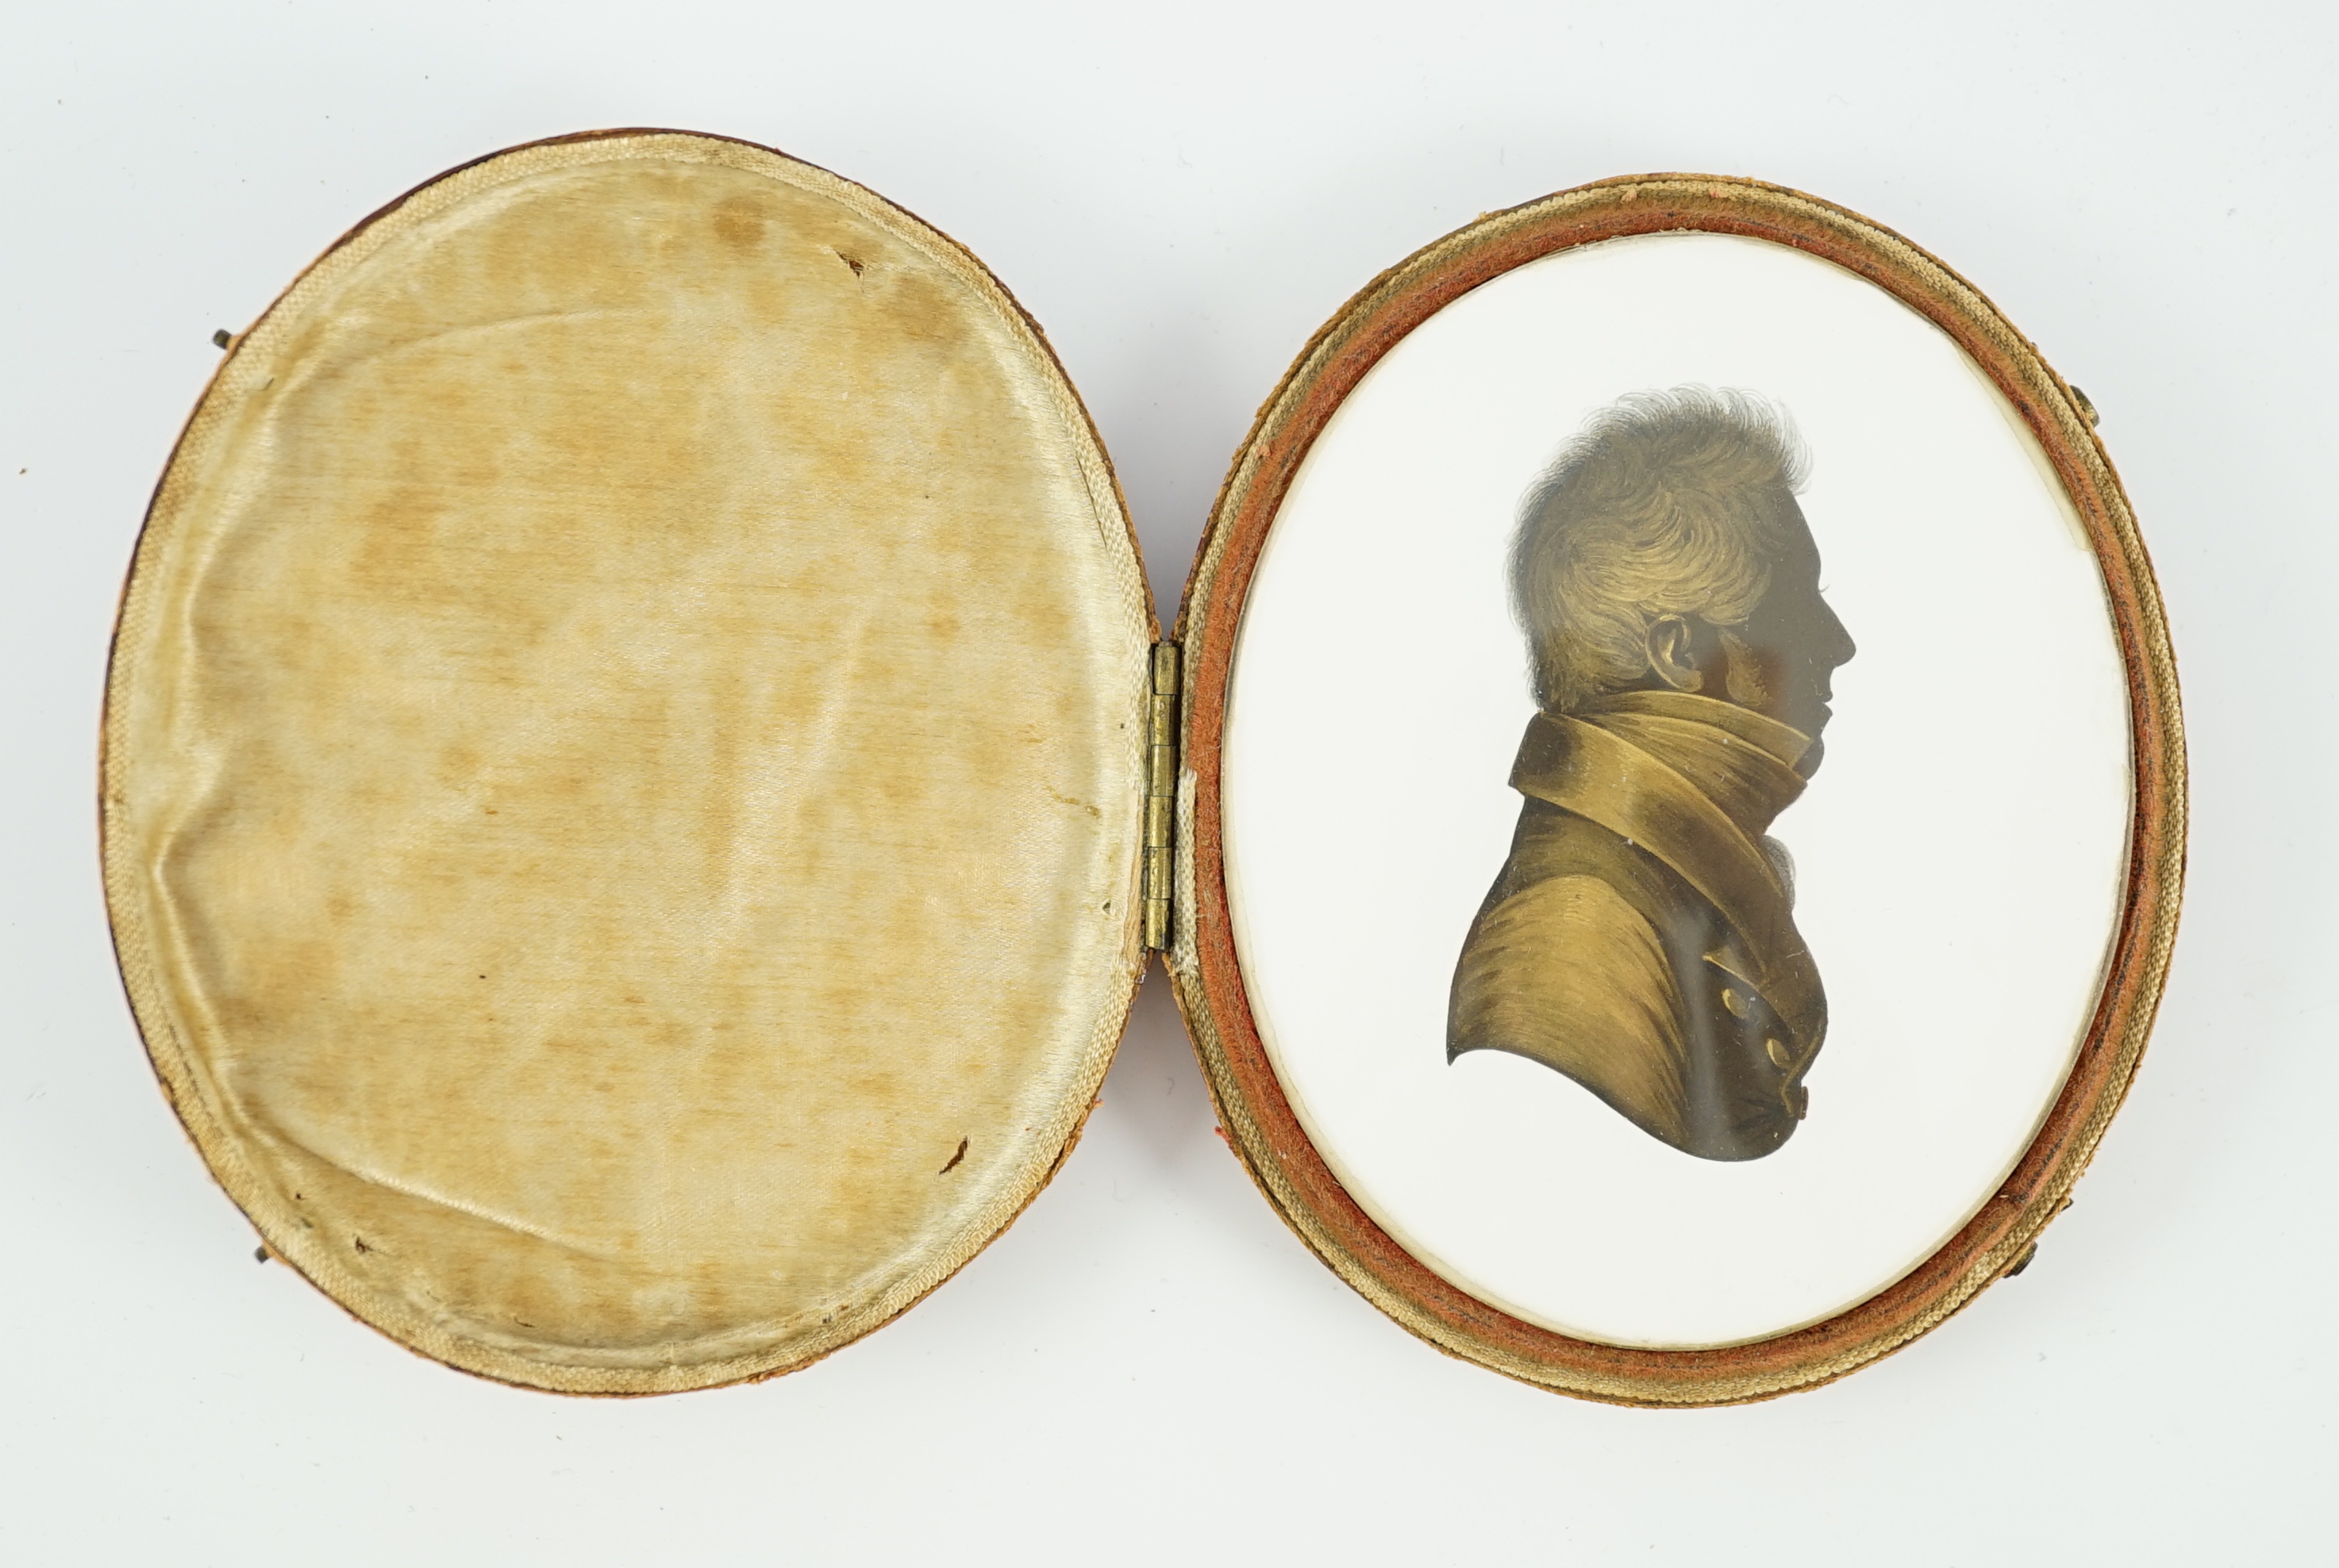 William Miers (1793-1863) , Silhouette of Captain Steel, painted and bronzed plaster, 8.3 x 6.6cm.